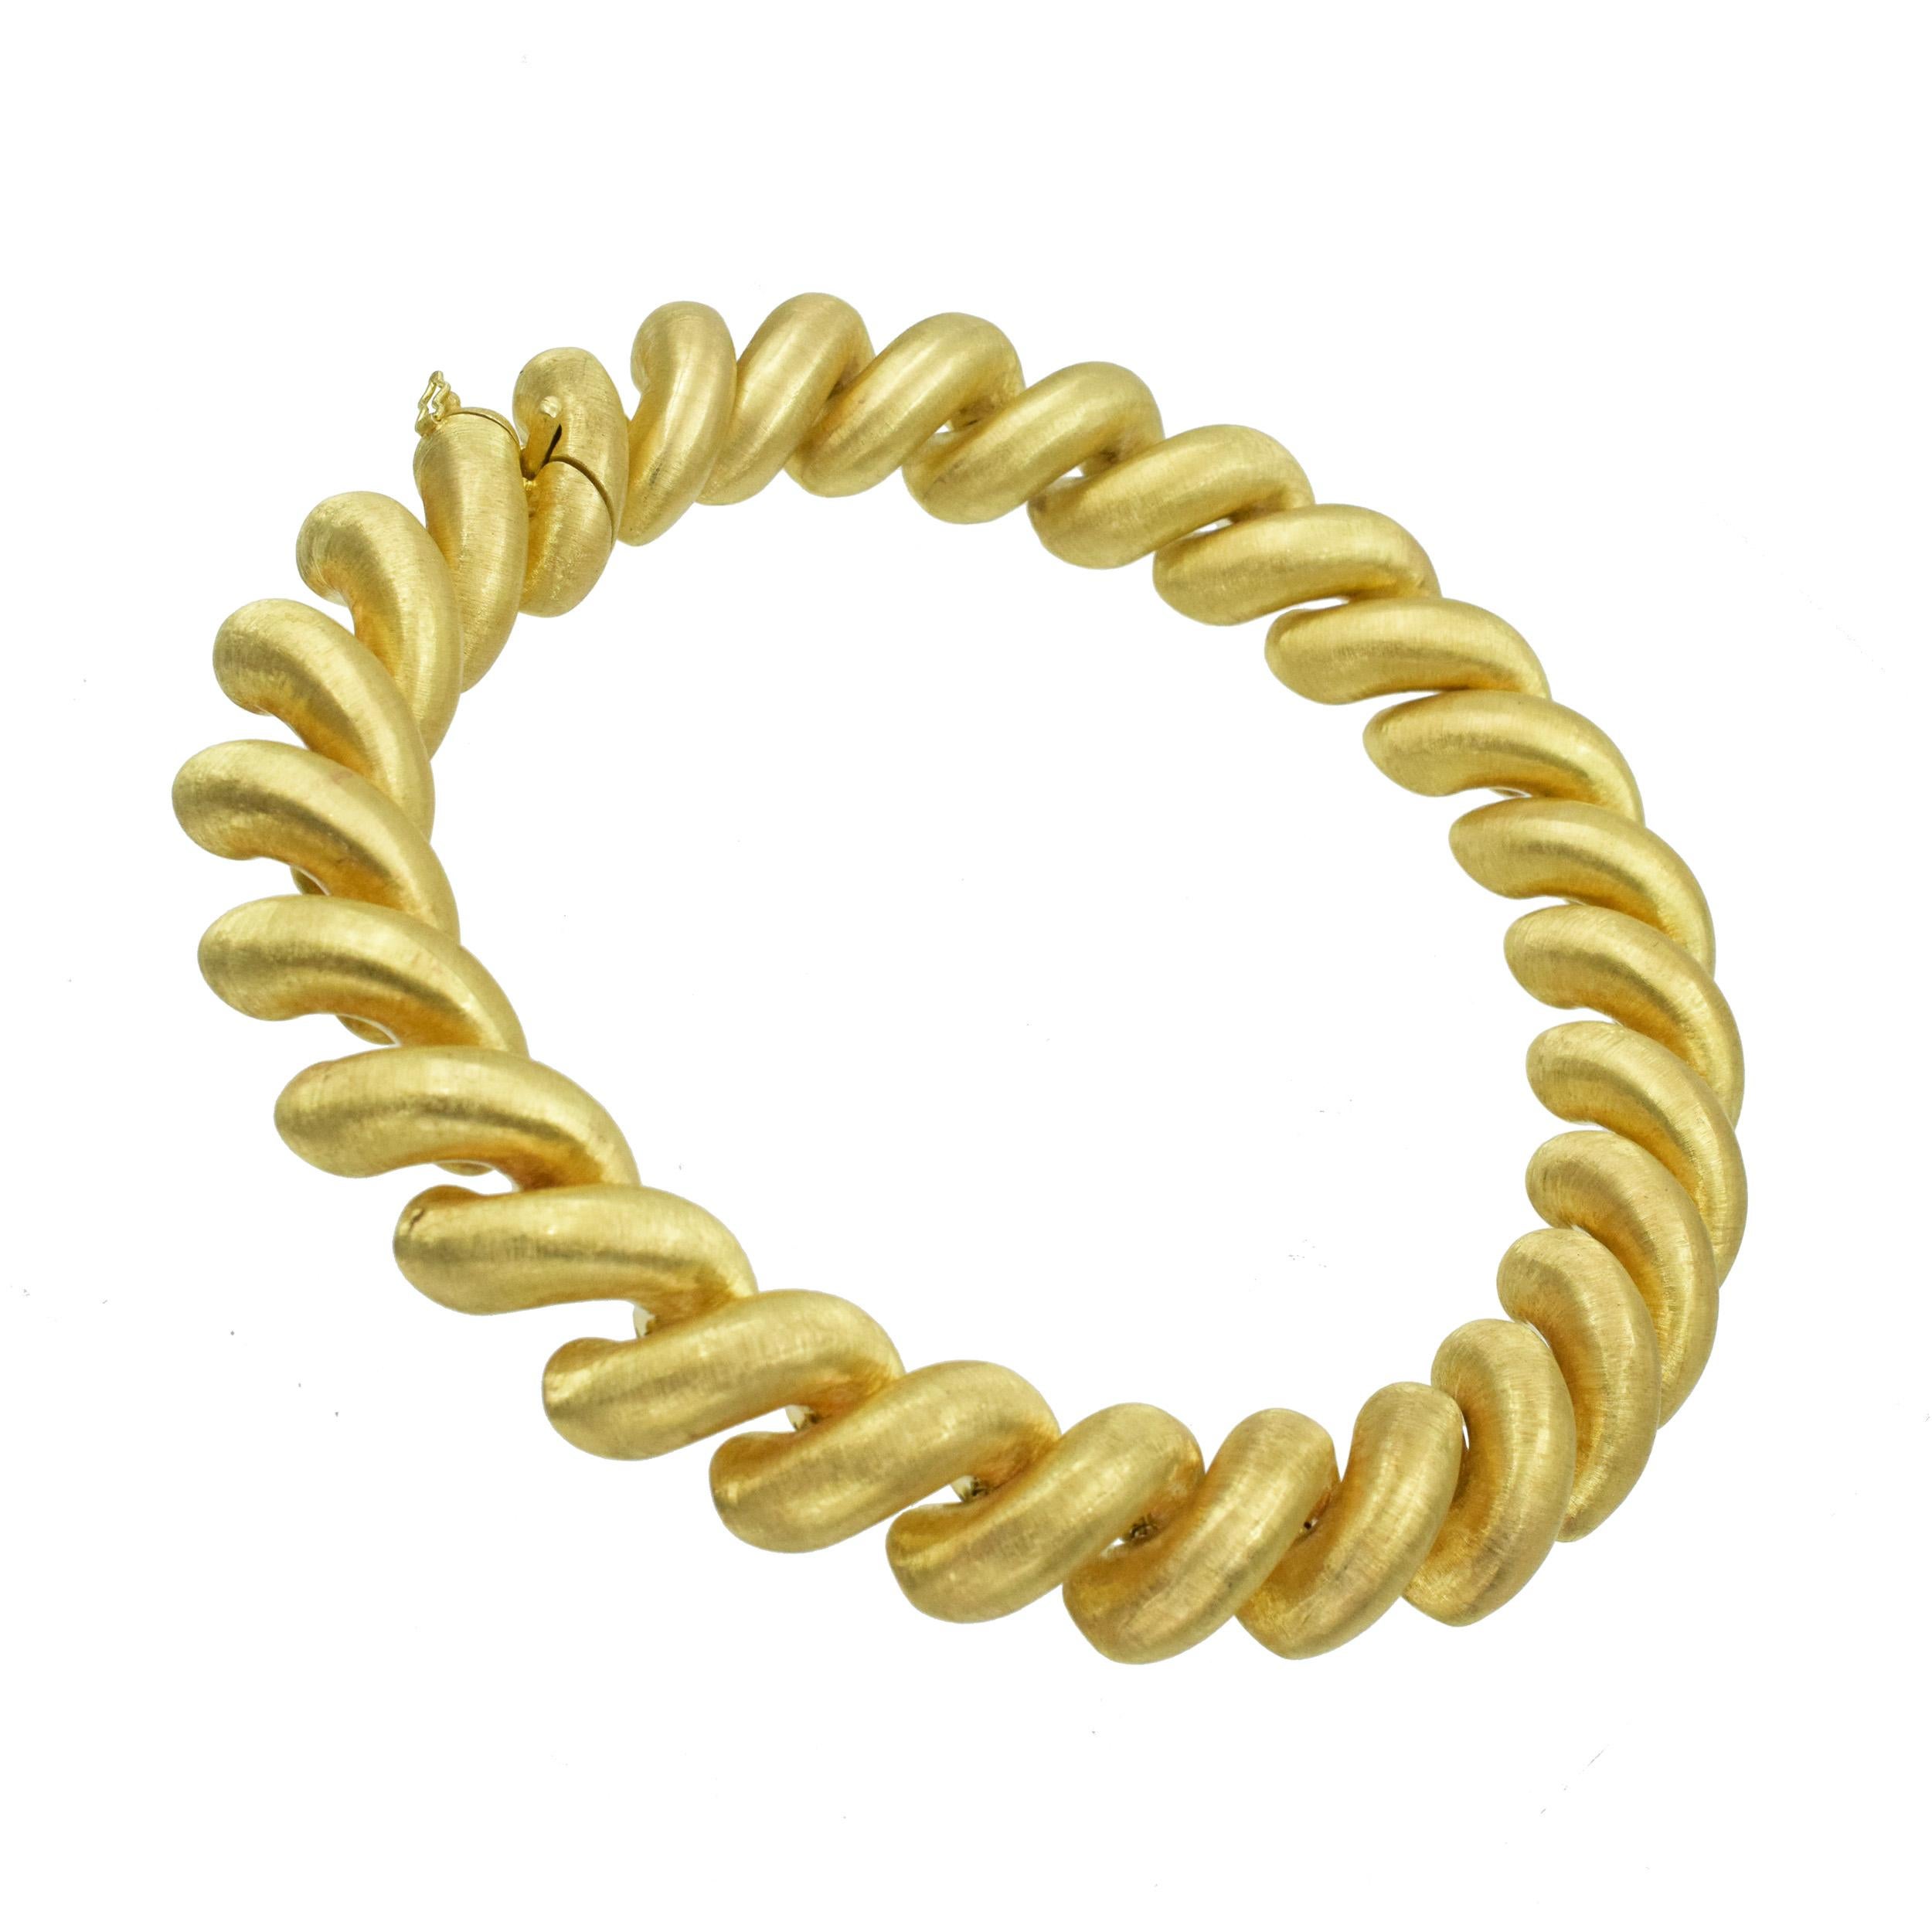 Buccellati 'San Marco' Link Macaroni Necklace in 18k yellow gold. The necklace features
Florentine finish. Equipped with box clasp and fold over security lock.
 Inscribed: Buccellati,
Italy, 18k, AR.
 Width: 20mm.
 Length: 16 inches.
 Weight: 172.4